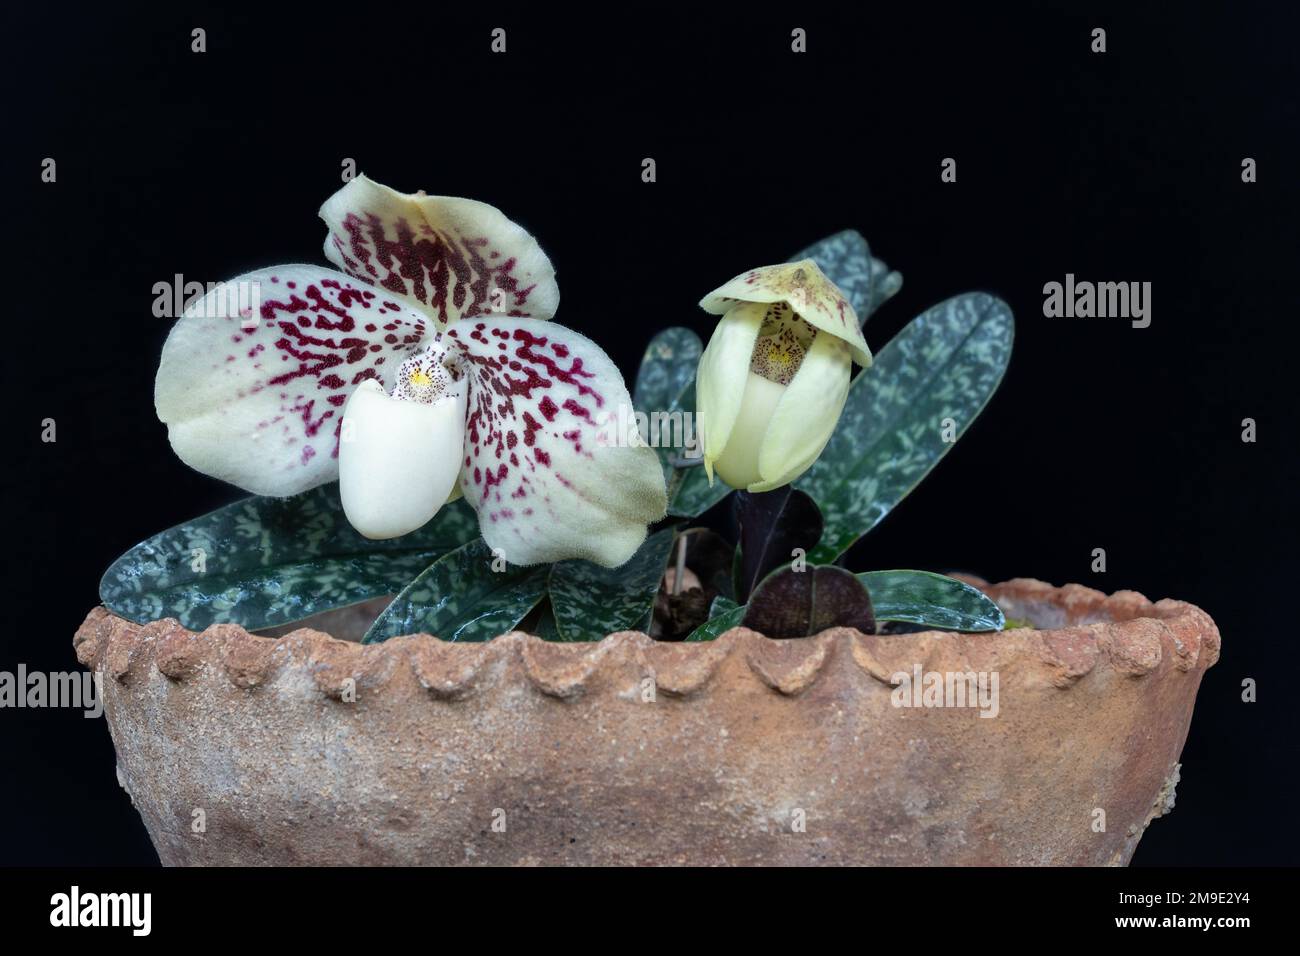 Close up view of lady slipper orchid species paphiopedilum godefroyae var leucochilum with flower and bud ready to bloom isolated on black background Stock Photo